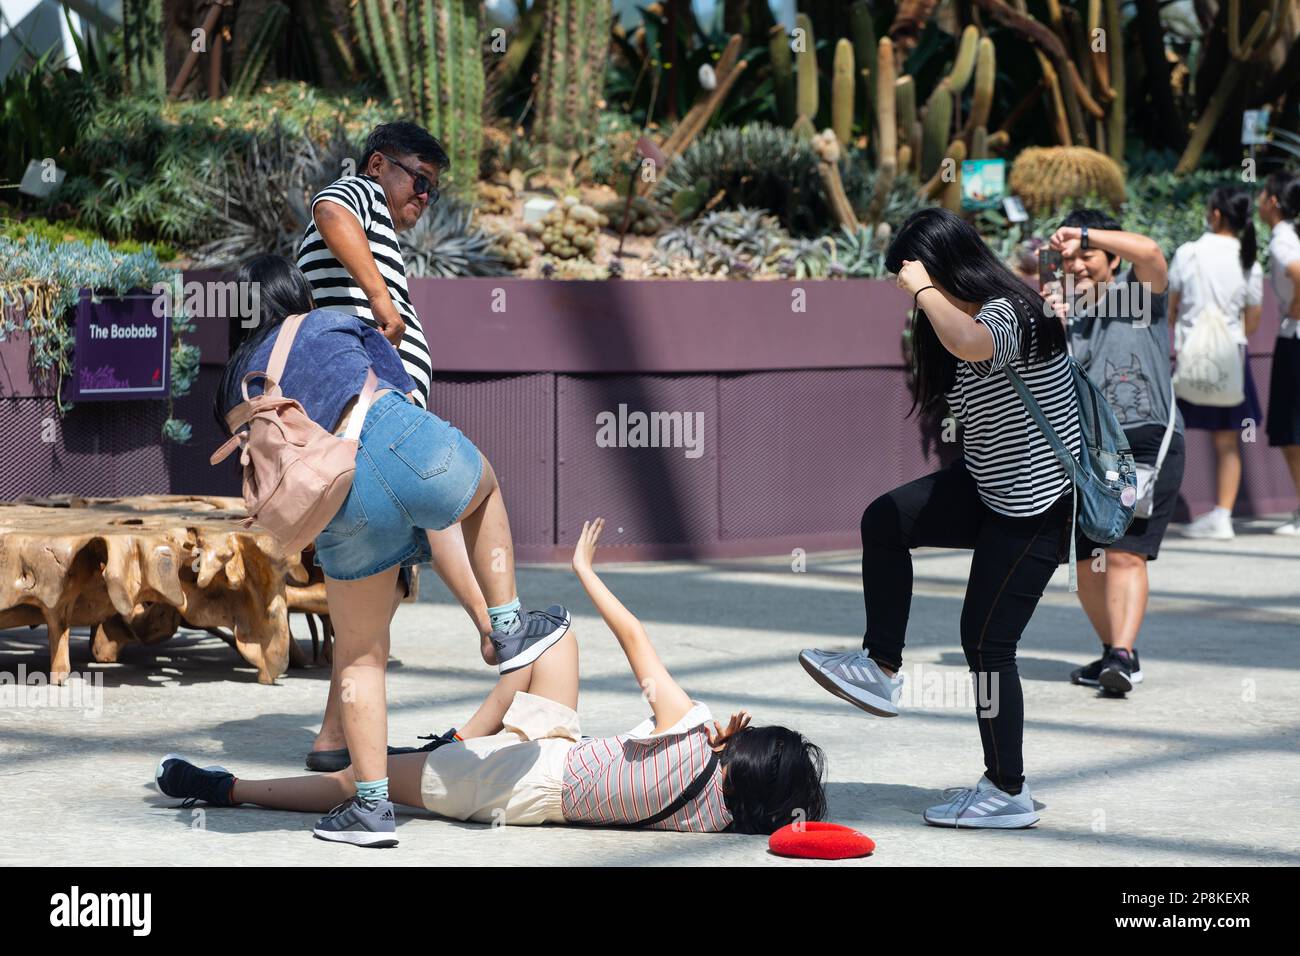 Weird family, the mother is taking group photo of family members to step their daughter on the floor in public space, they are just playing. Stock Photo